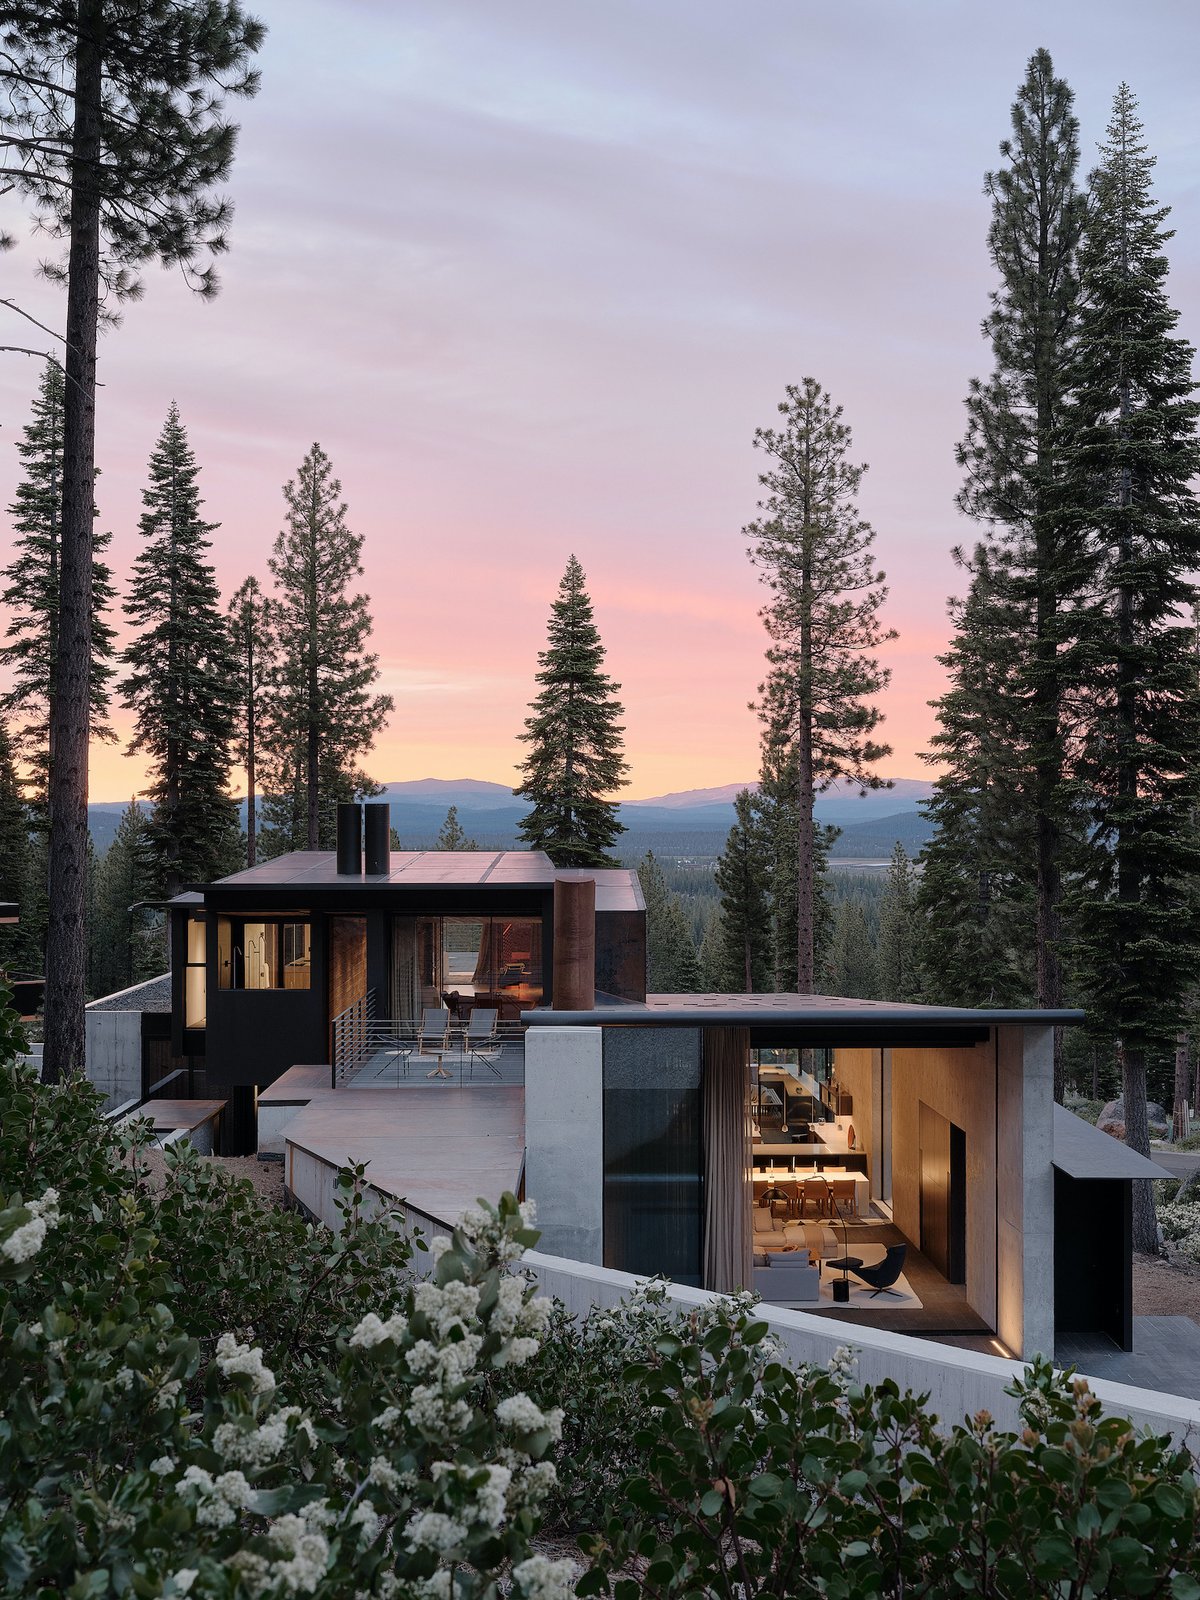 The home is located in Martis Camp in Truckee, California, north of Lake Tahoe. 